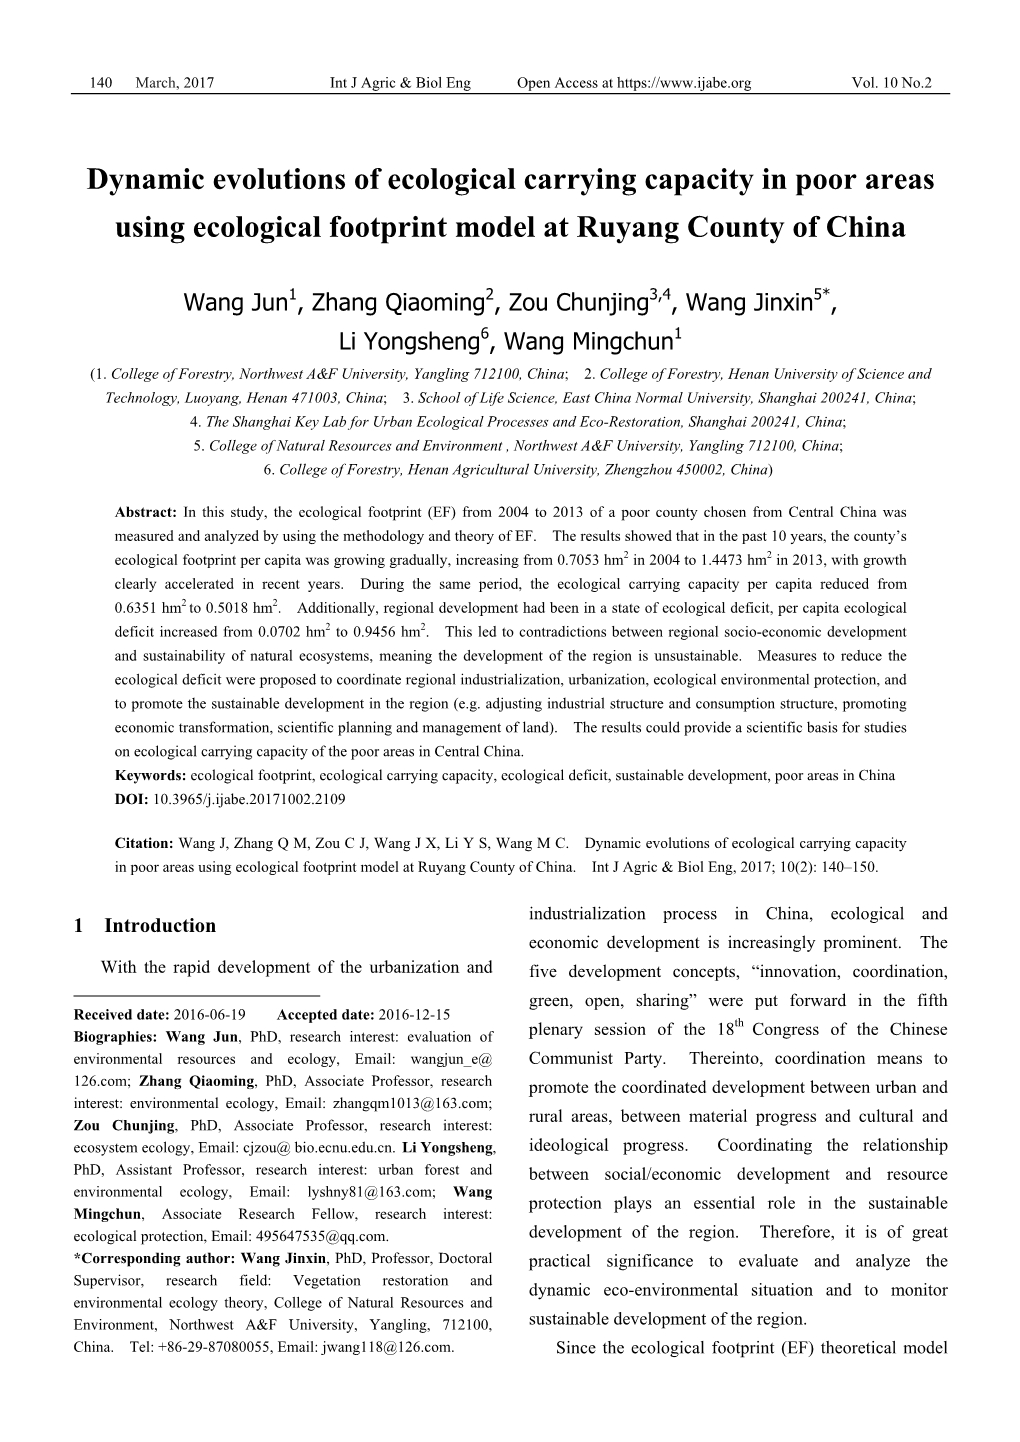 Dynamic Evolutions of Ecological Carrying Capacity in Poor Areas Using Ecological Footprint Model at Ruyang County of China